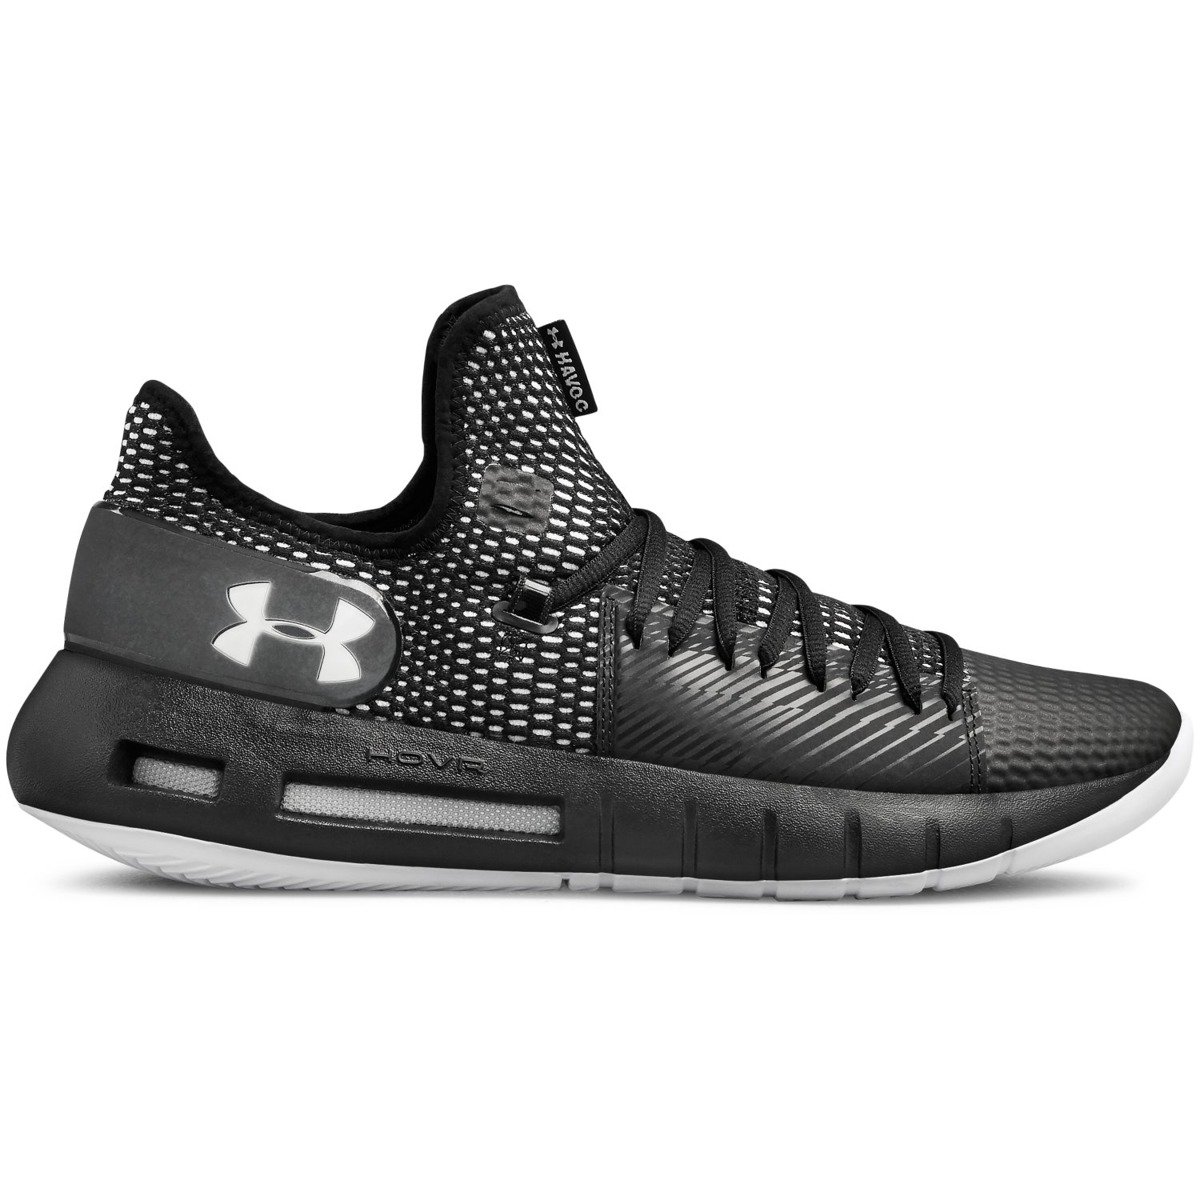 Under Armour Hovr Havoc Low